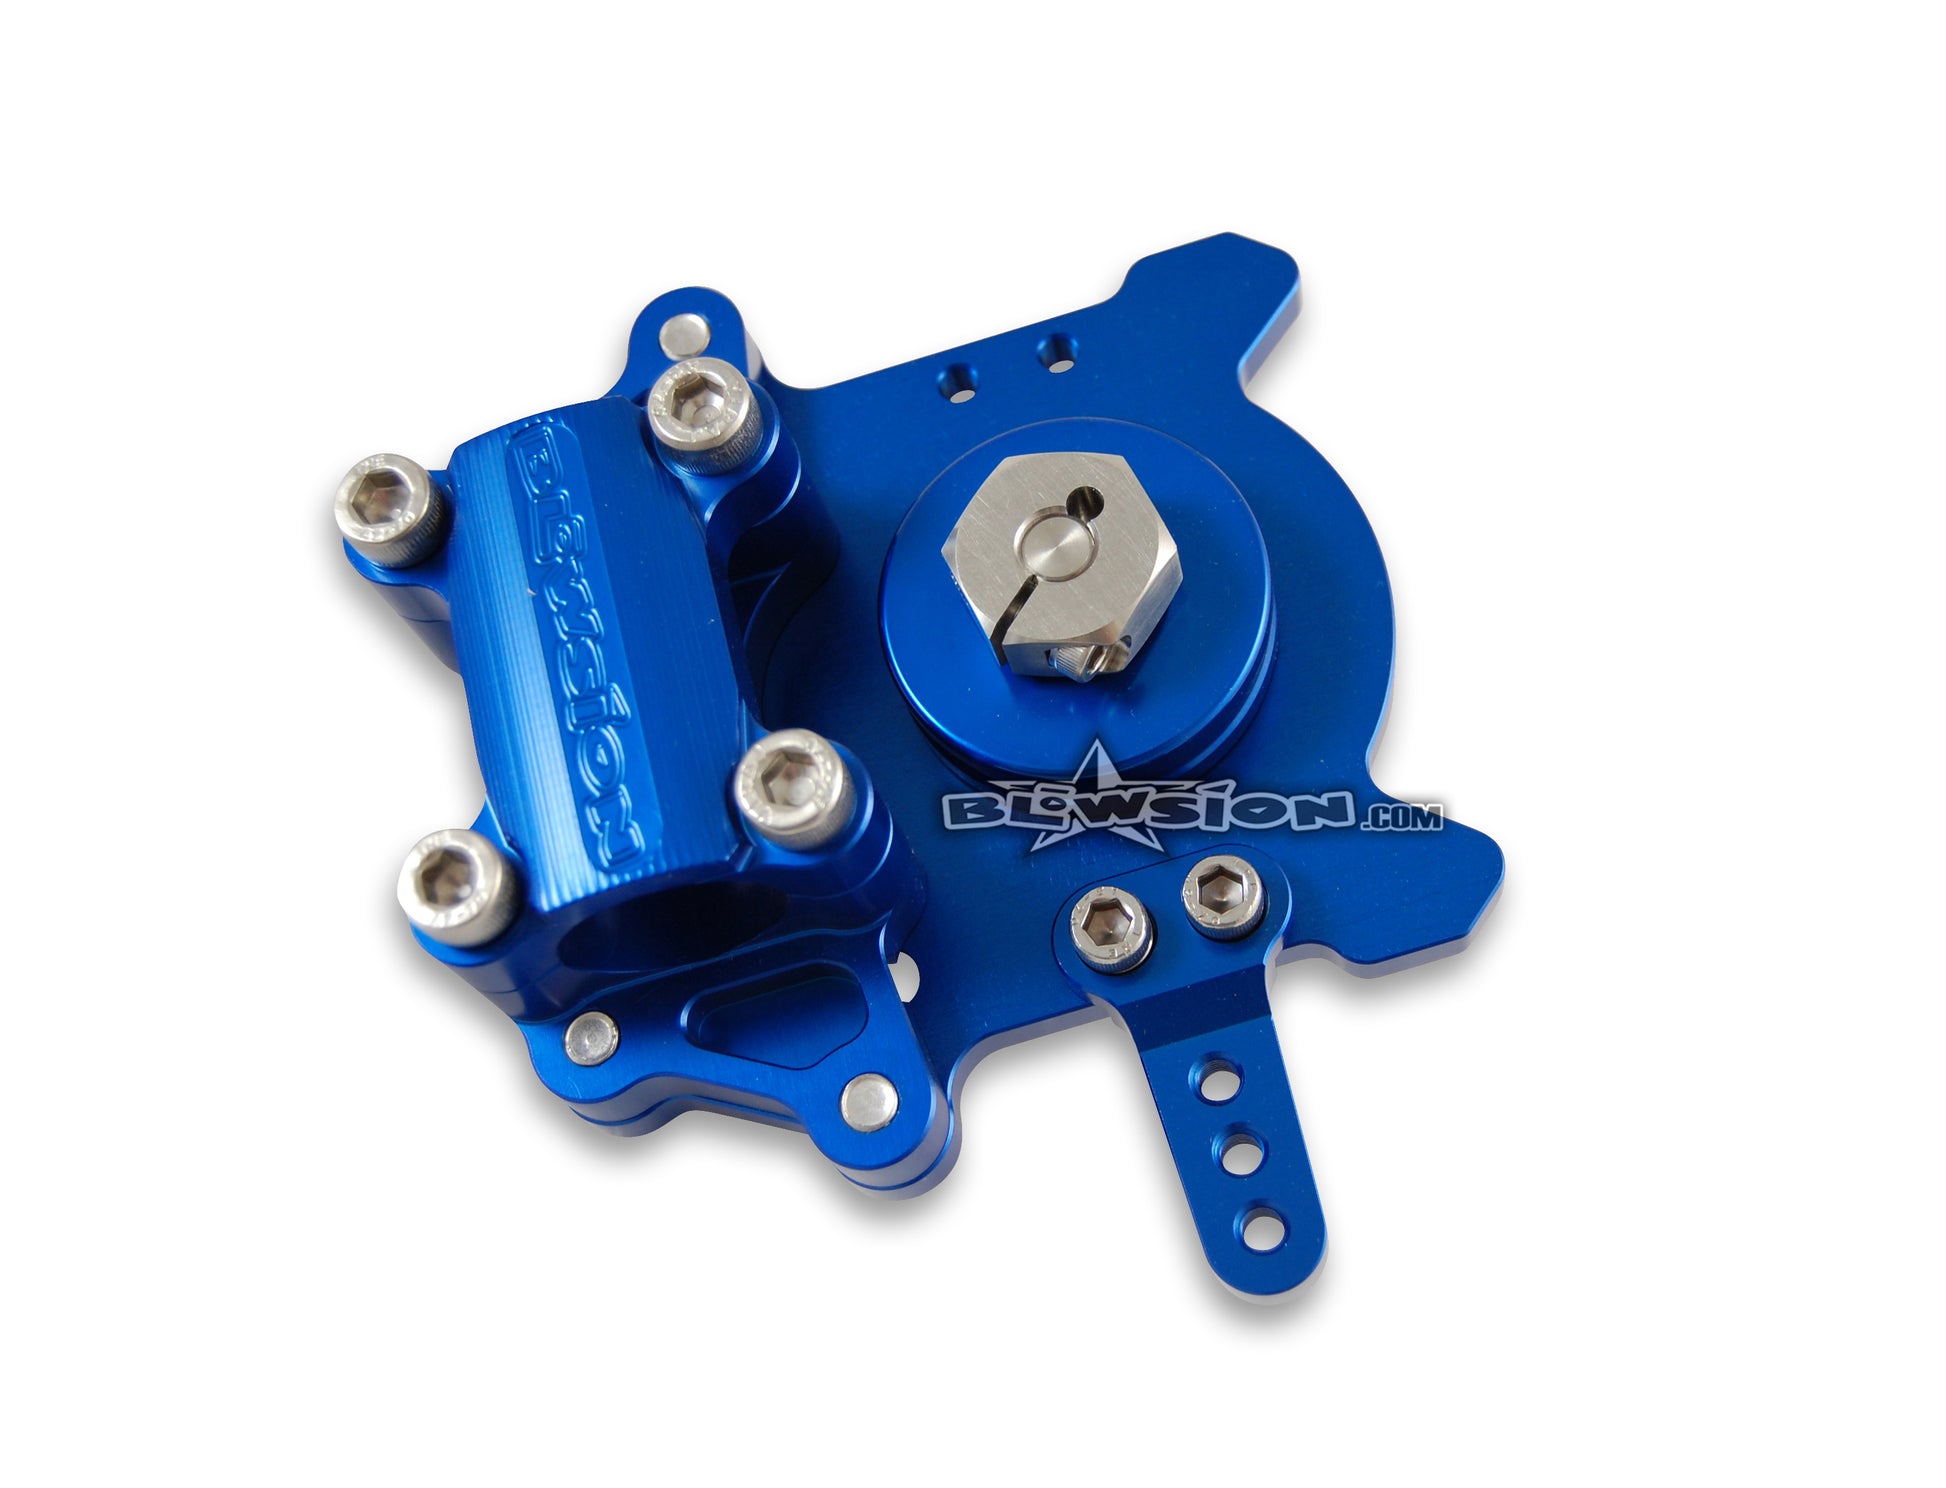 Blowsion Steering System 1-1/8" Fat - Anodized Blue